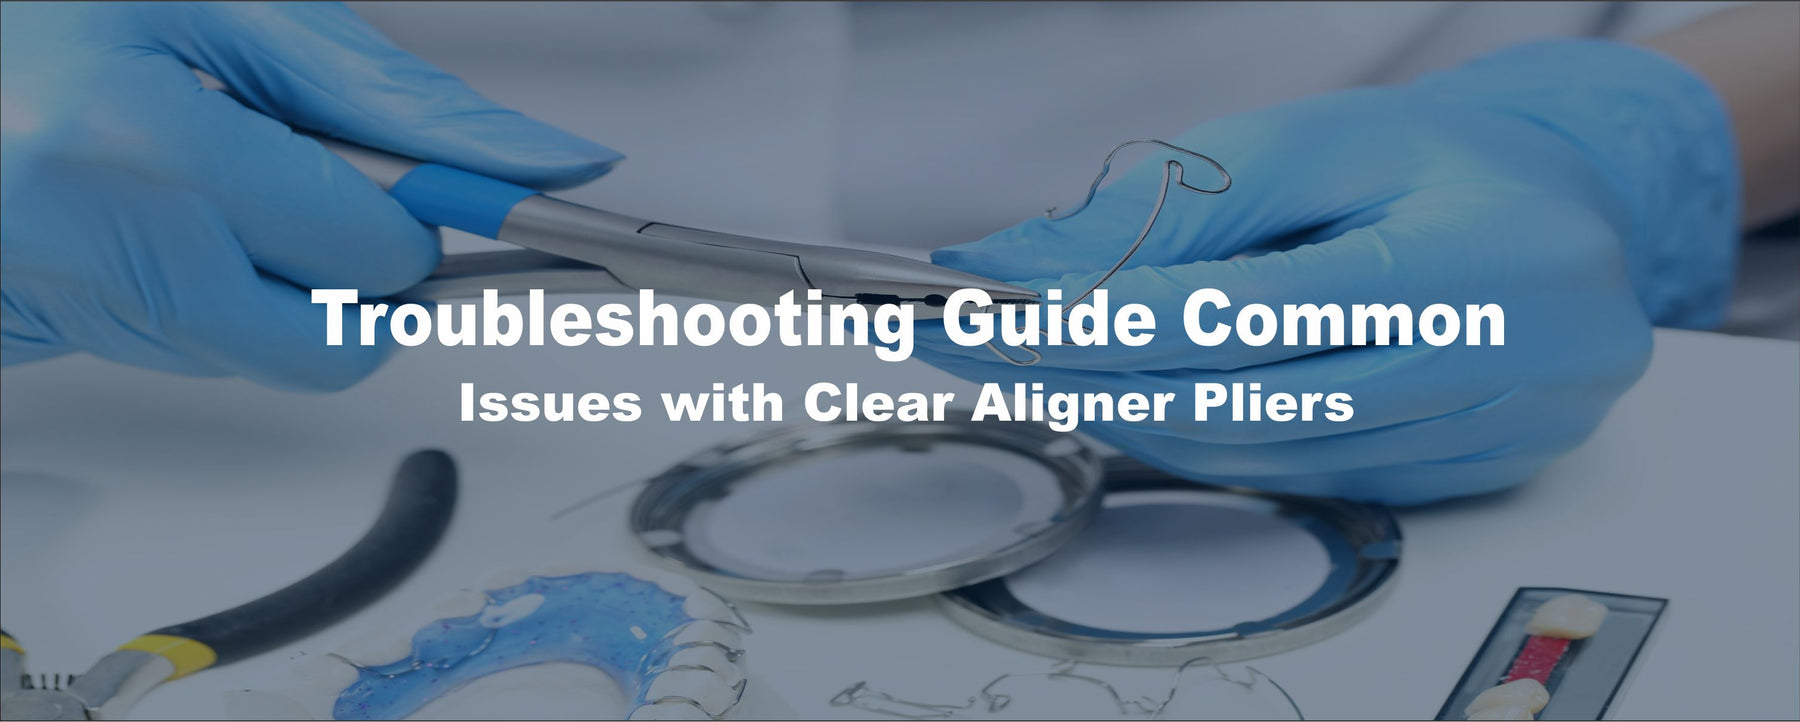 Troubleshooting Guide: Common Issues with Clear Aligner Pliers